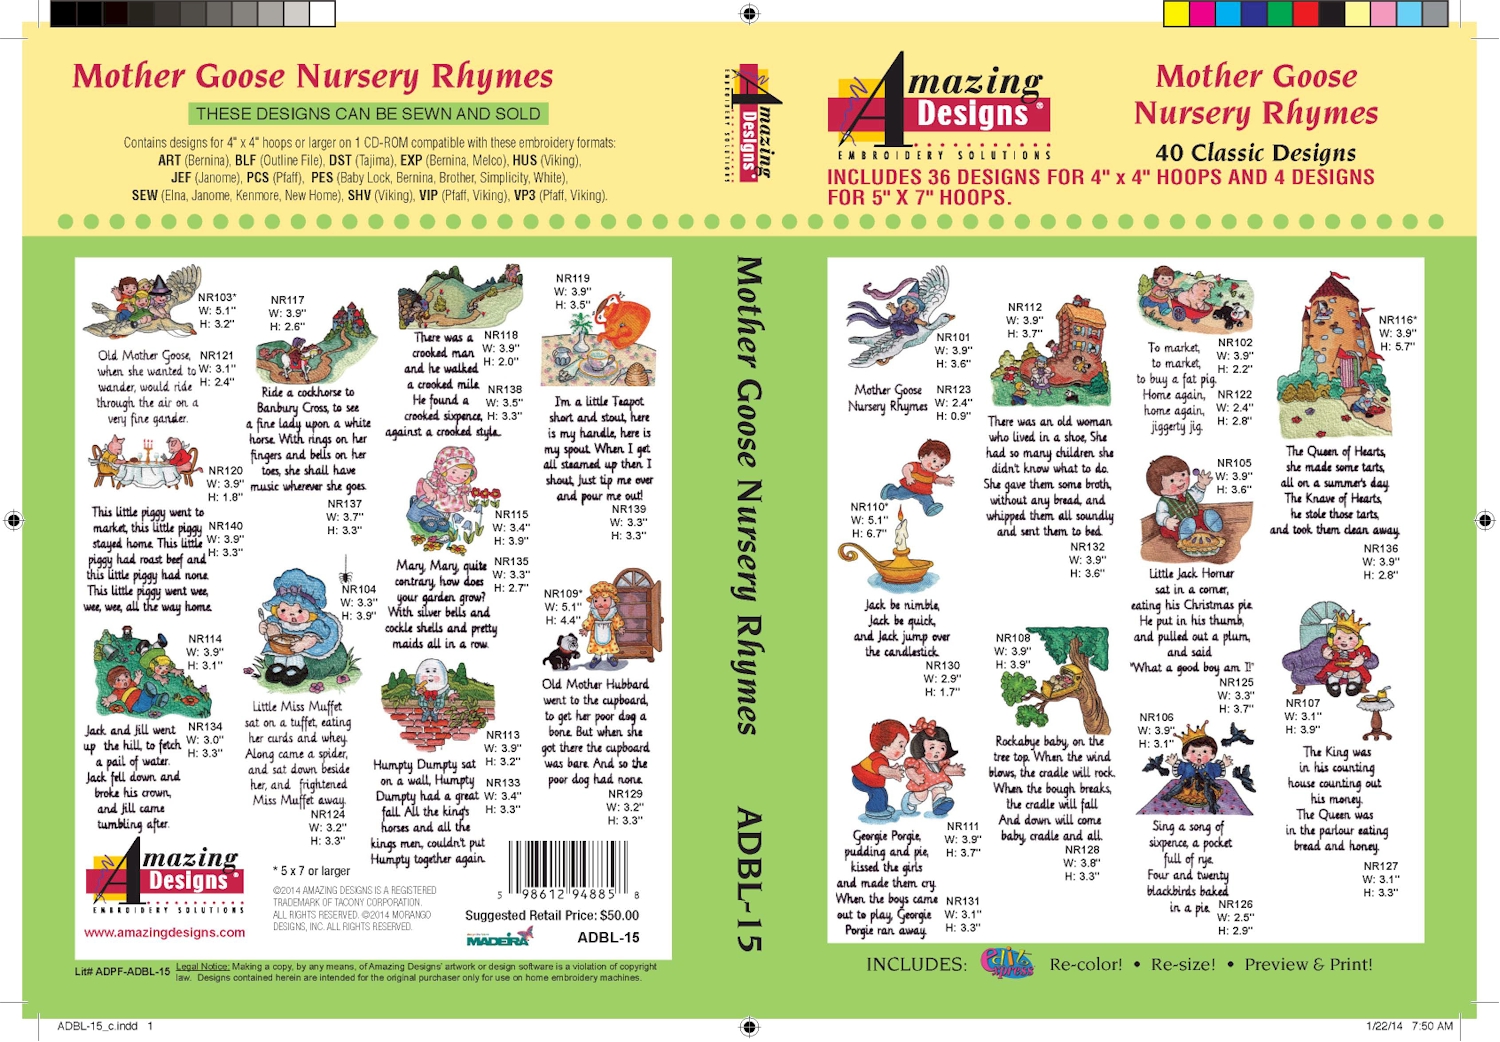 Mother Goose Nursery Rhymes Embroidery Designs by Amazing Designs on a Multi-Format CD-ROM ADBL-15 - CLOSEOUT